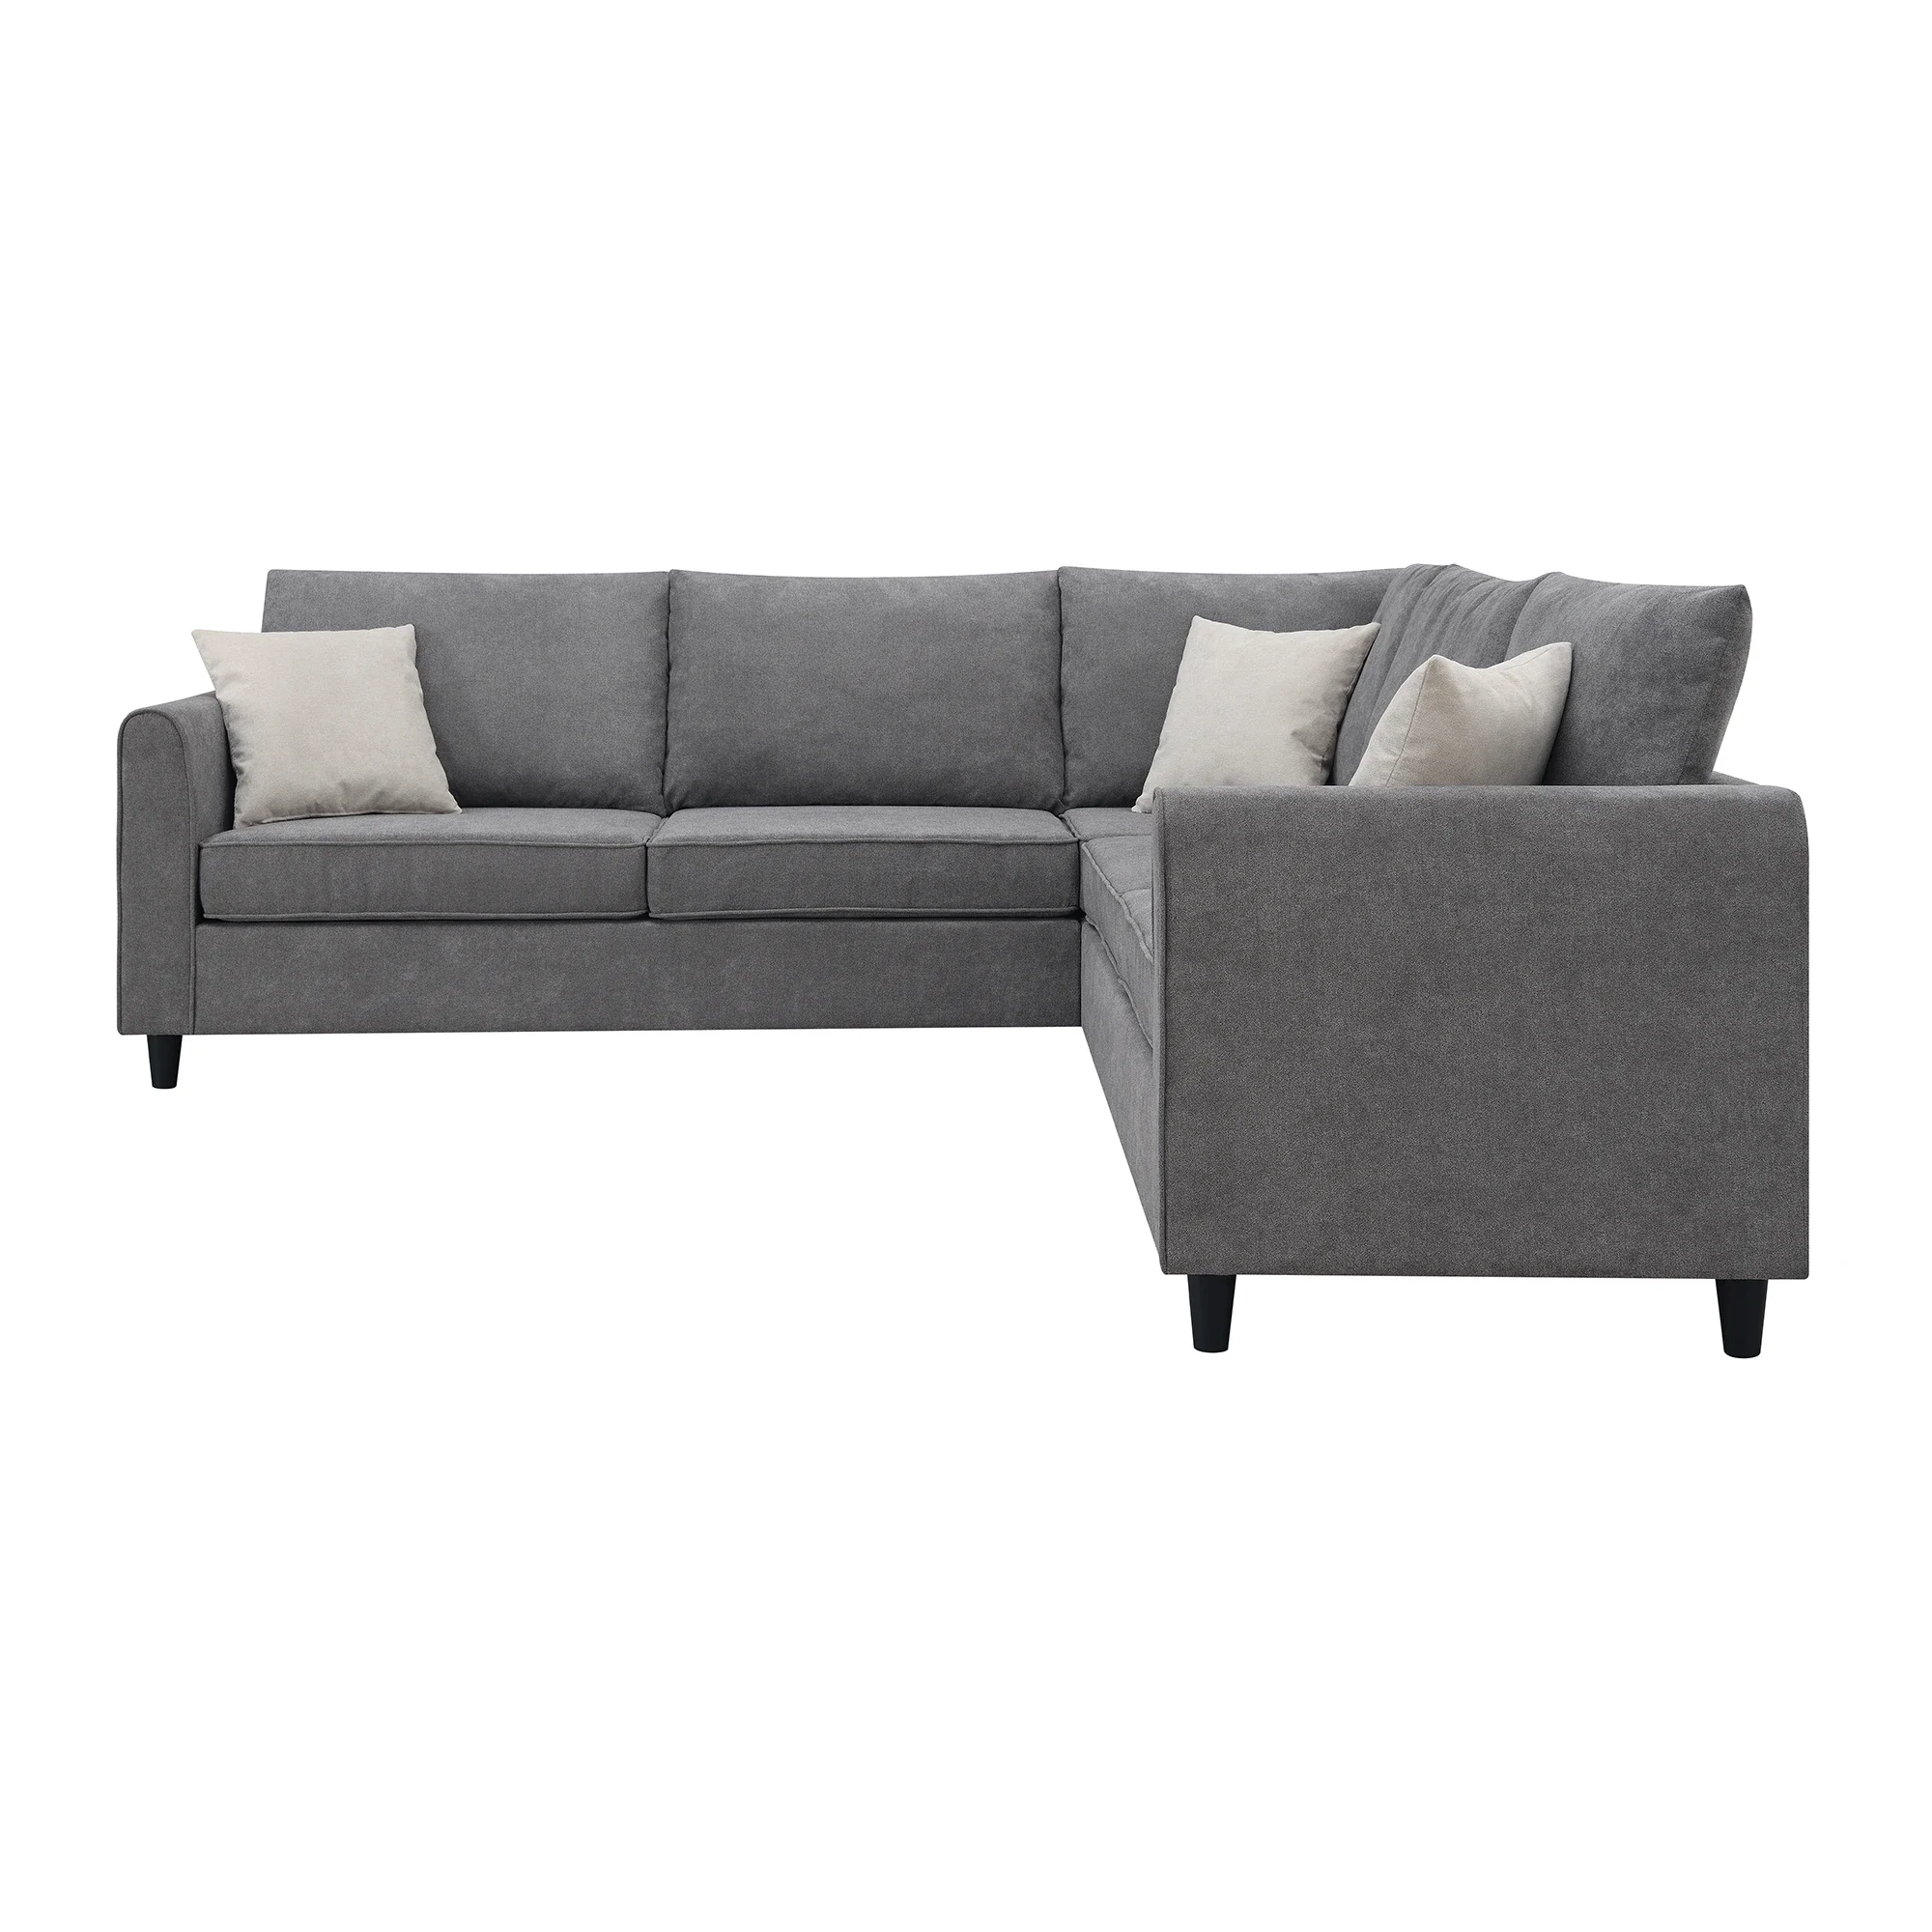 

Sectional Sofa Couches Living Room Sets 7 Seats Modular with Ottoman L Shape Fabric Sofa Corner Couch Set with 3 Pillows, Grey